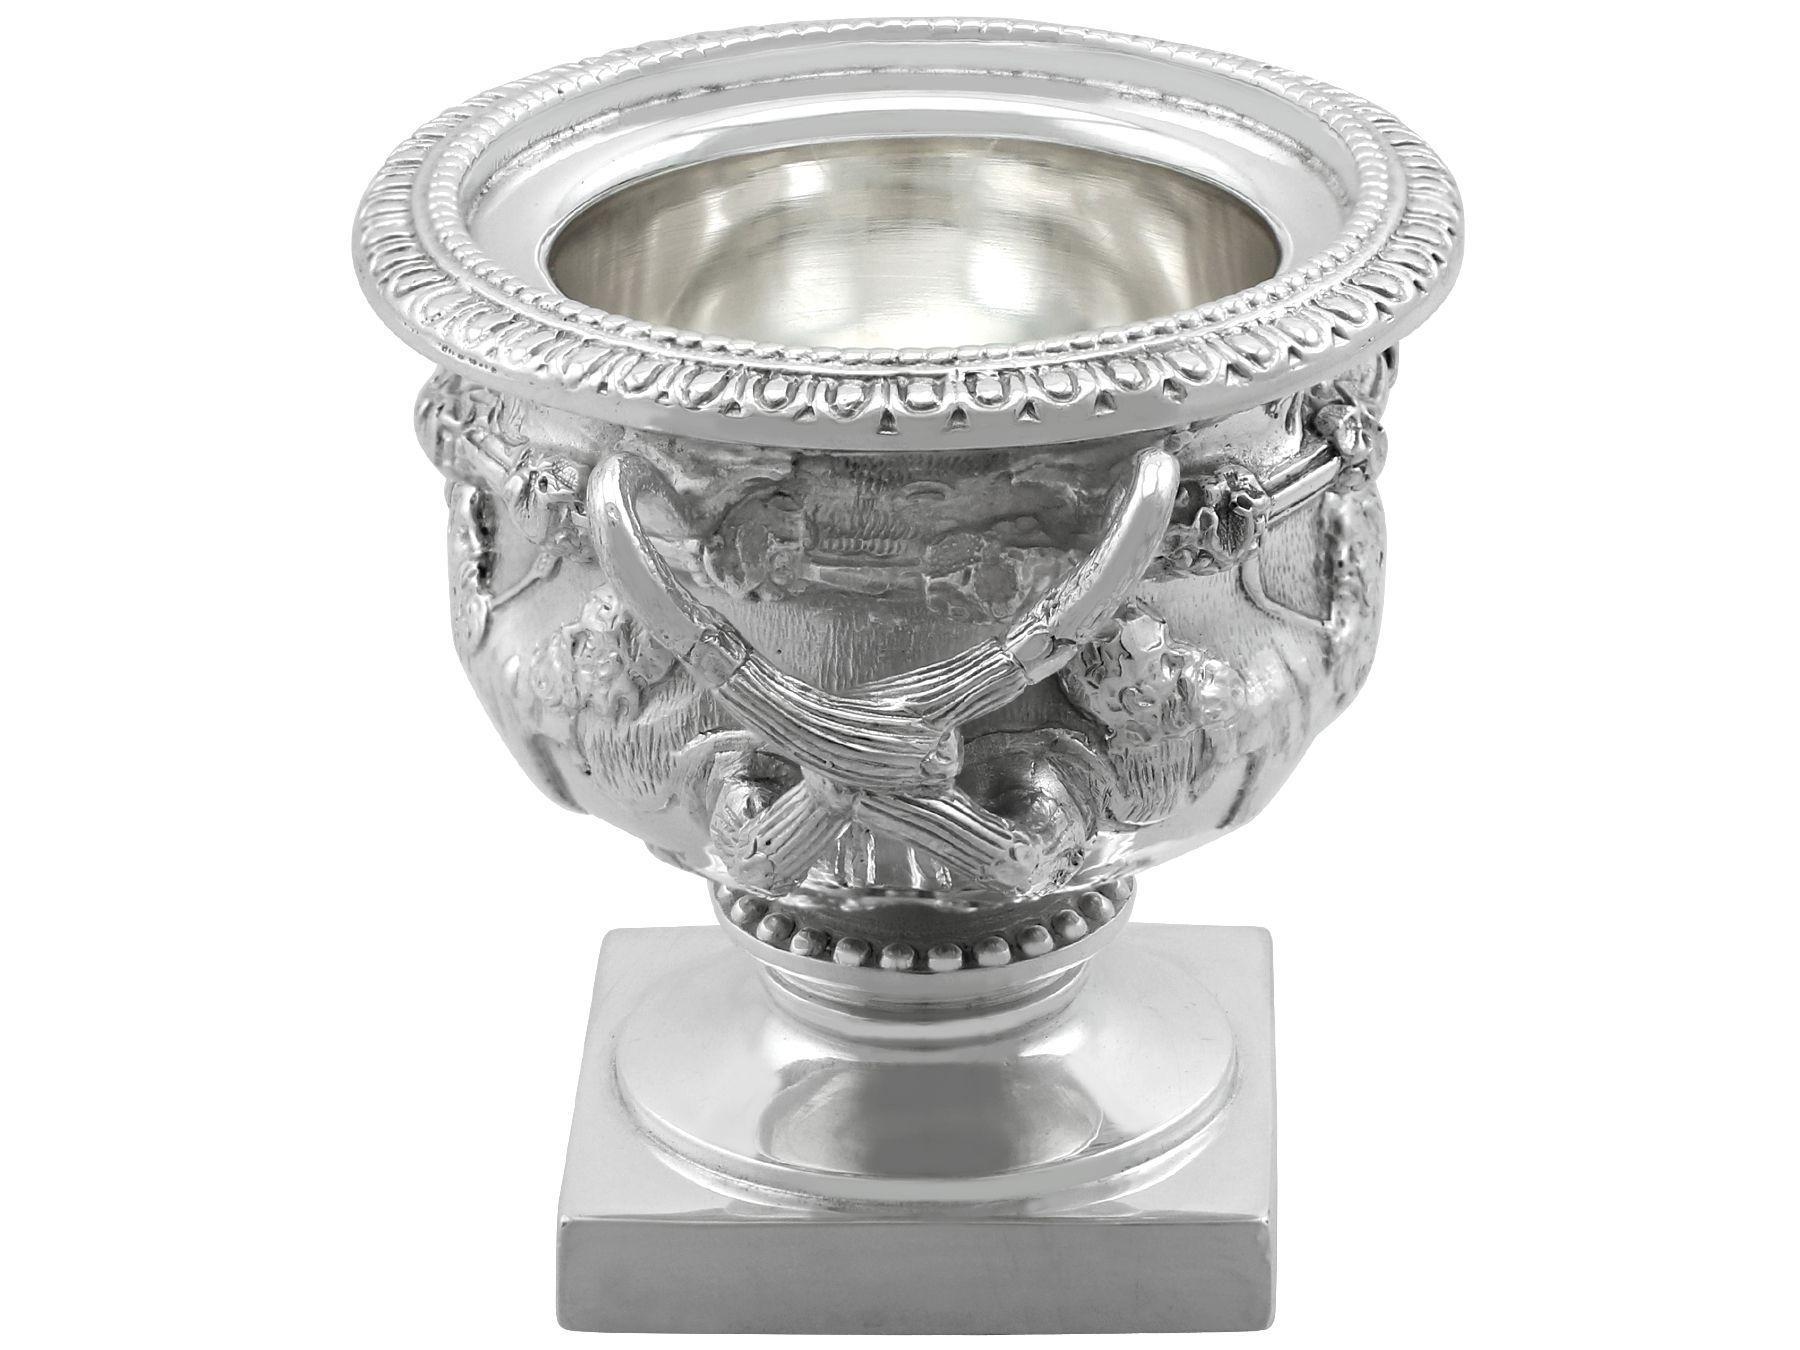 An exceptional, fine and impressive vintage 1980s English sterling silver miniature Warwick vase; an addition to our silver presentation collection.

This exceptional vintage miniature silver Warwick vase, in sterling standard, has a Campania shaped